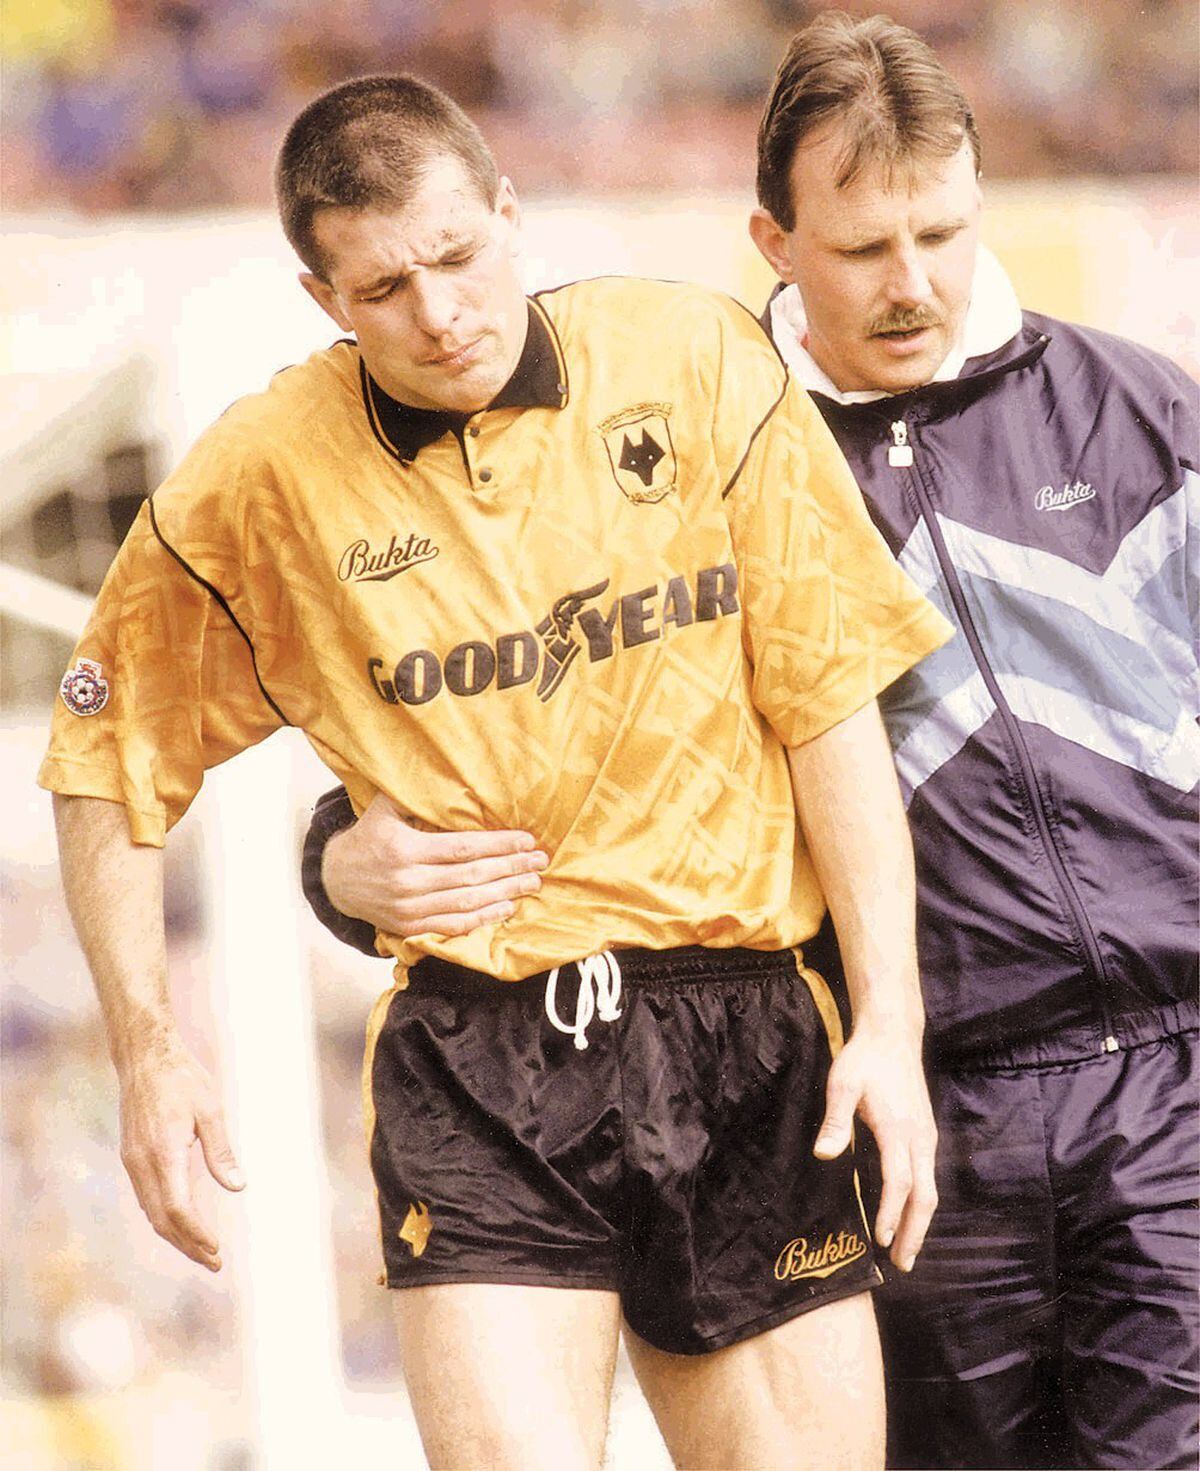 Steve Bull is helped off the pitch by Paul Darby in the 1991/92 season